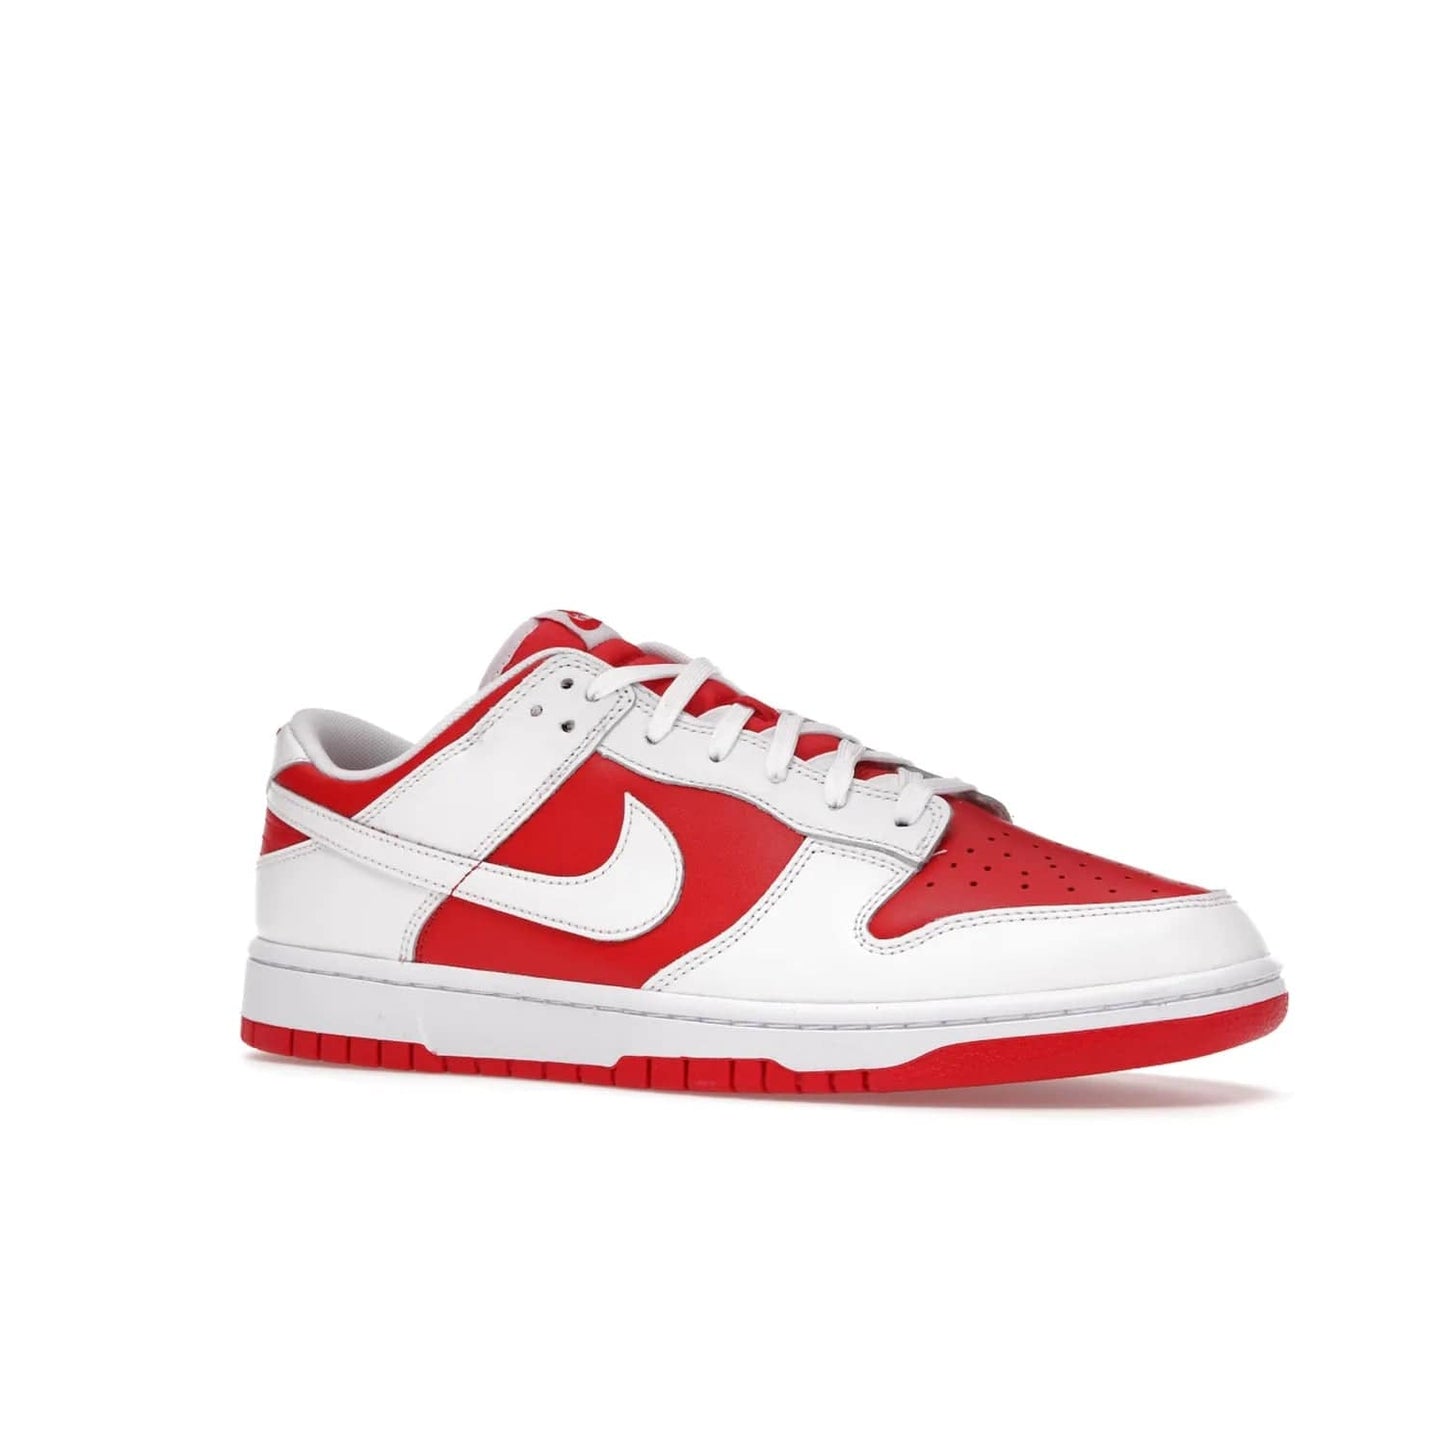 Nike Dunk Low Championship Red (2021) - Image 4 - Only at www.BallersClubKickz.com - A bold and stylish Nike Dunk Low Championship Red from 2021 with a classic retro design. University Red upper, white leather overlays and Swooshes, and a woven tongue label. Make a statement with these sleek kicks!